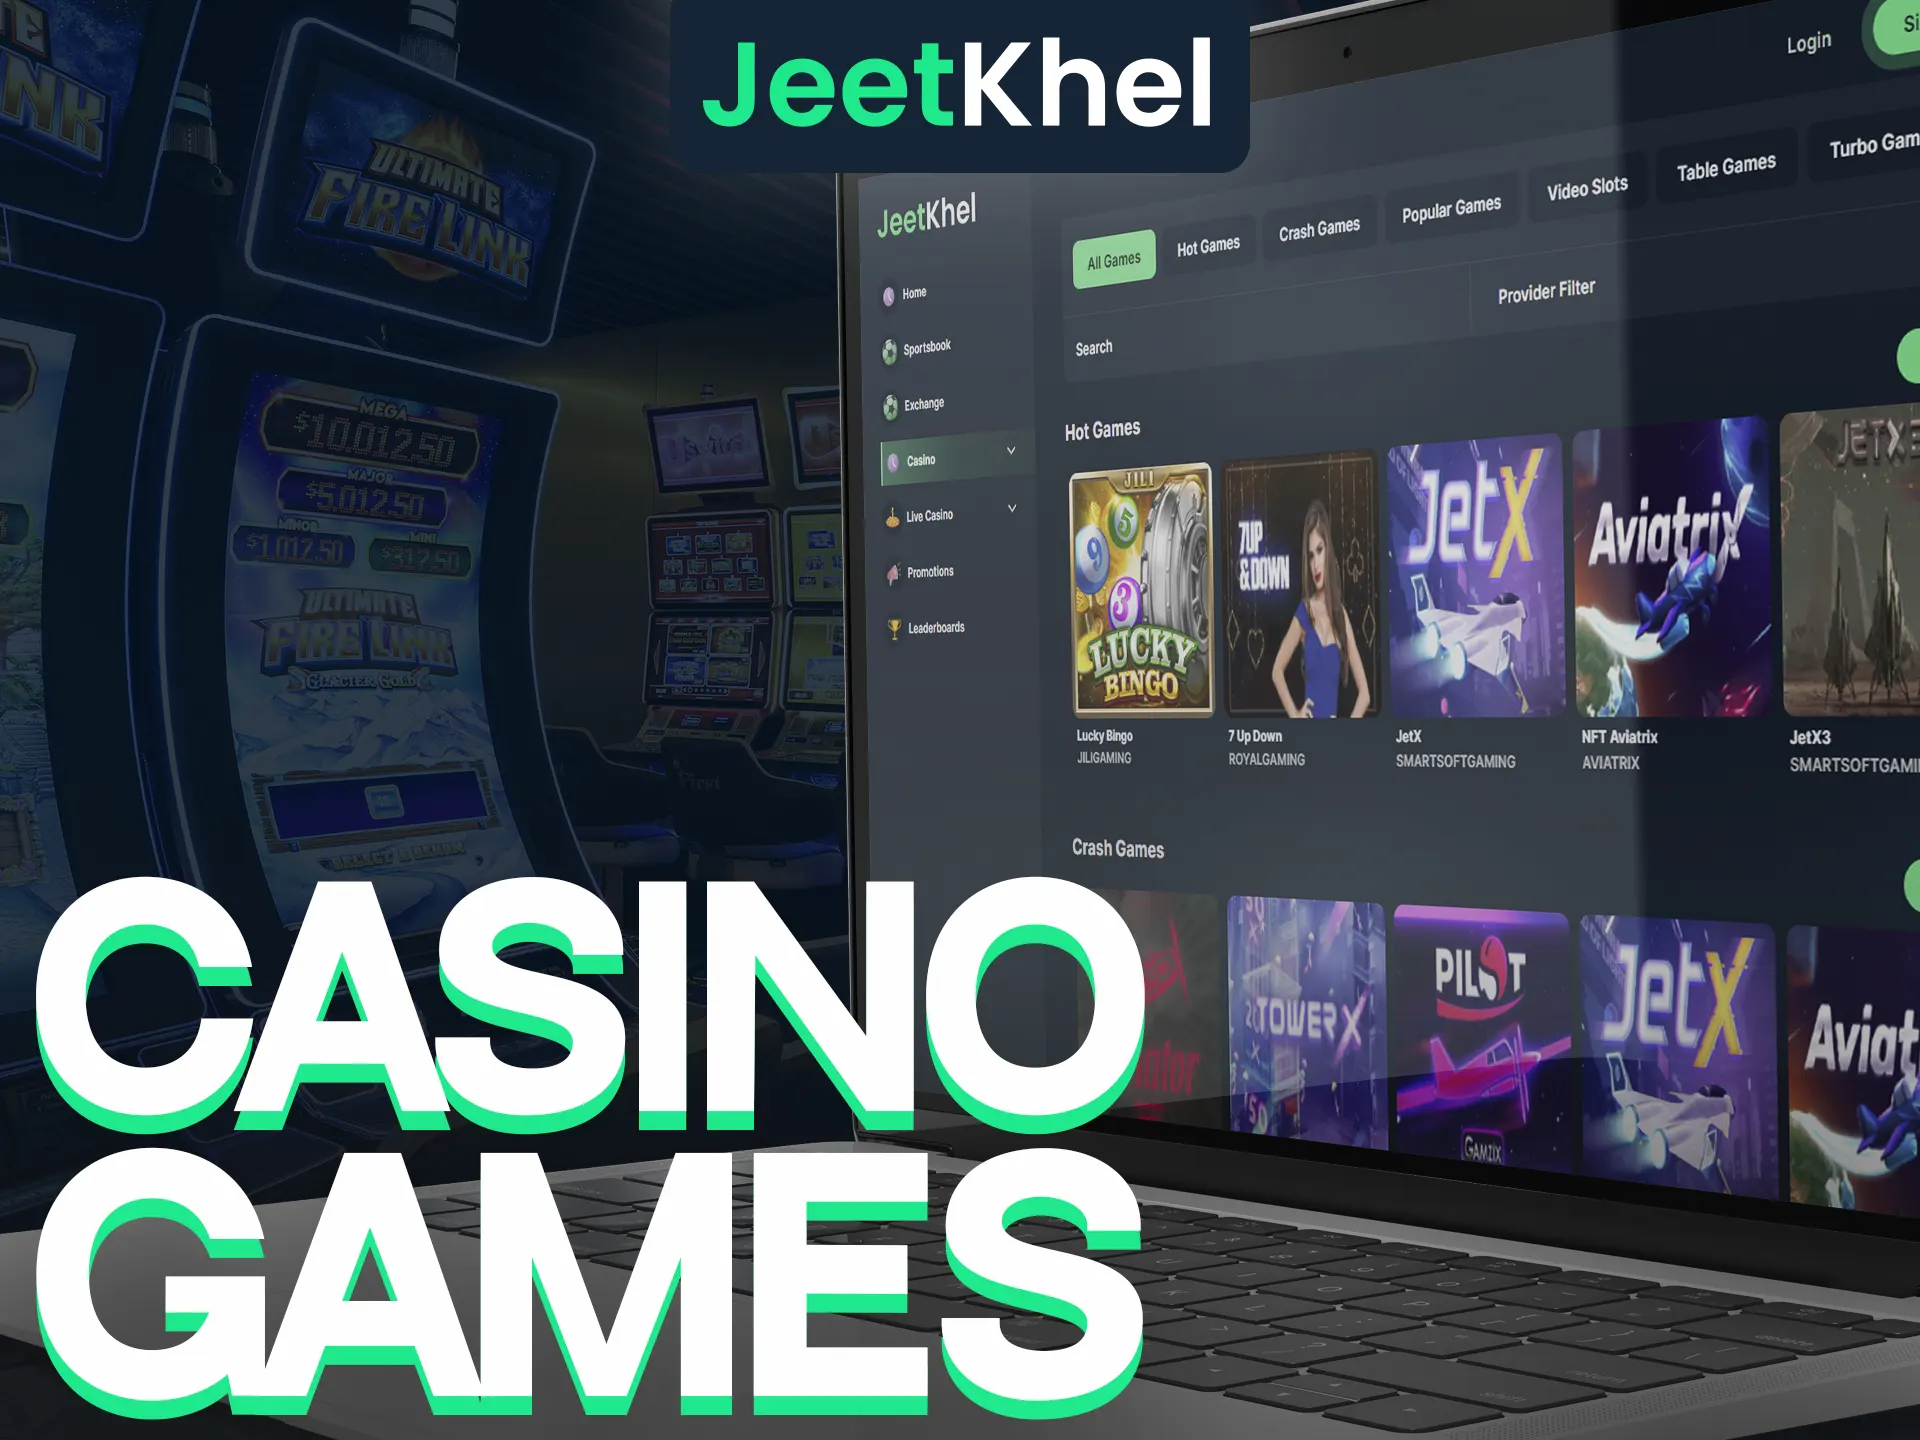 Play your favourite casino games at Jeetkheel.